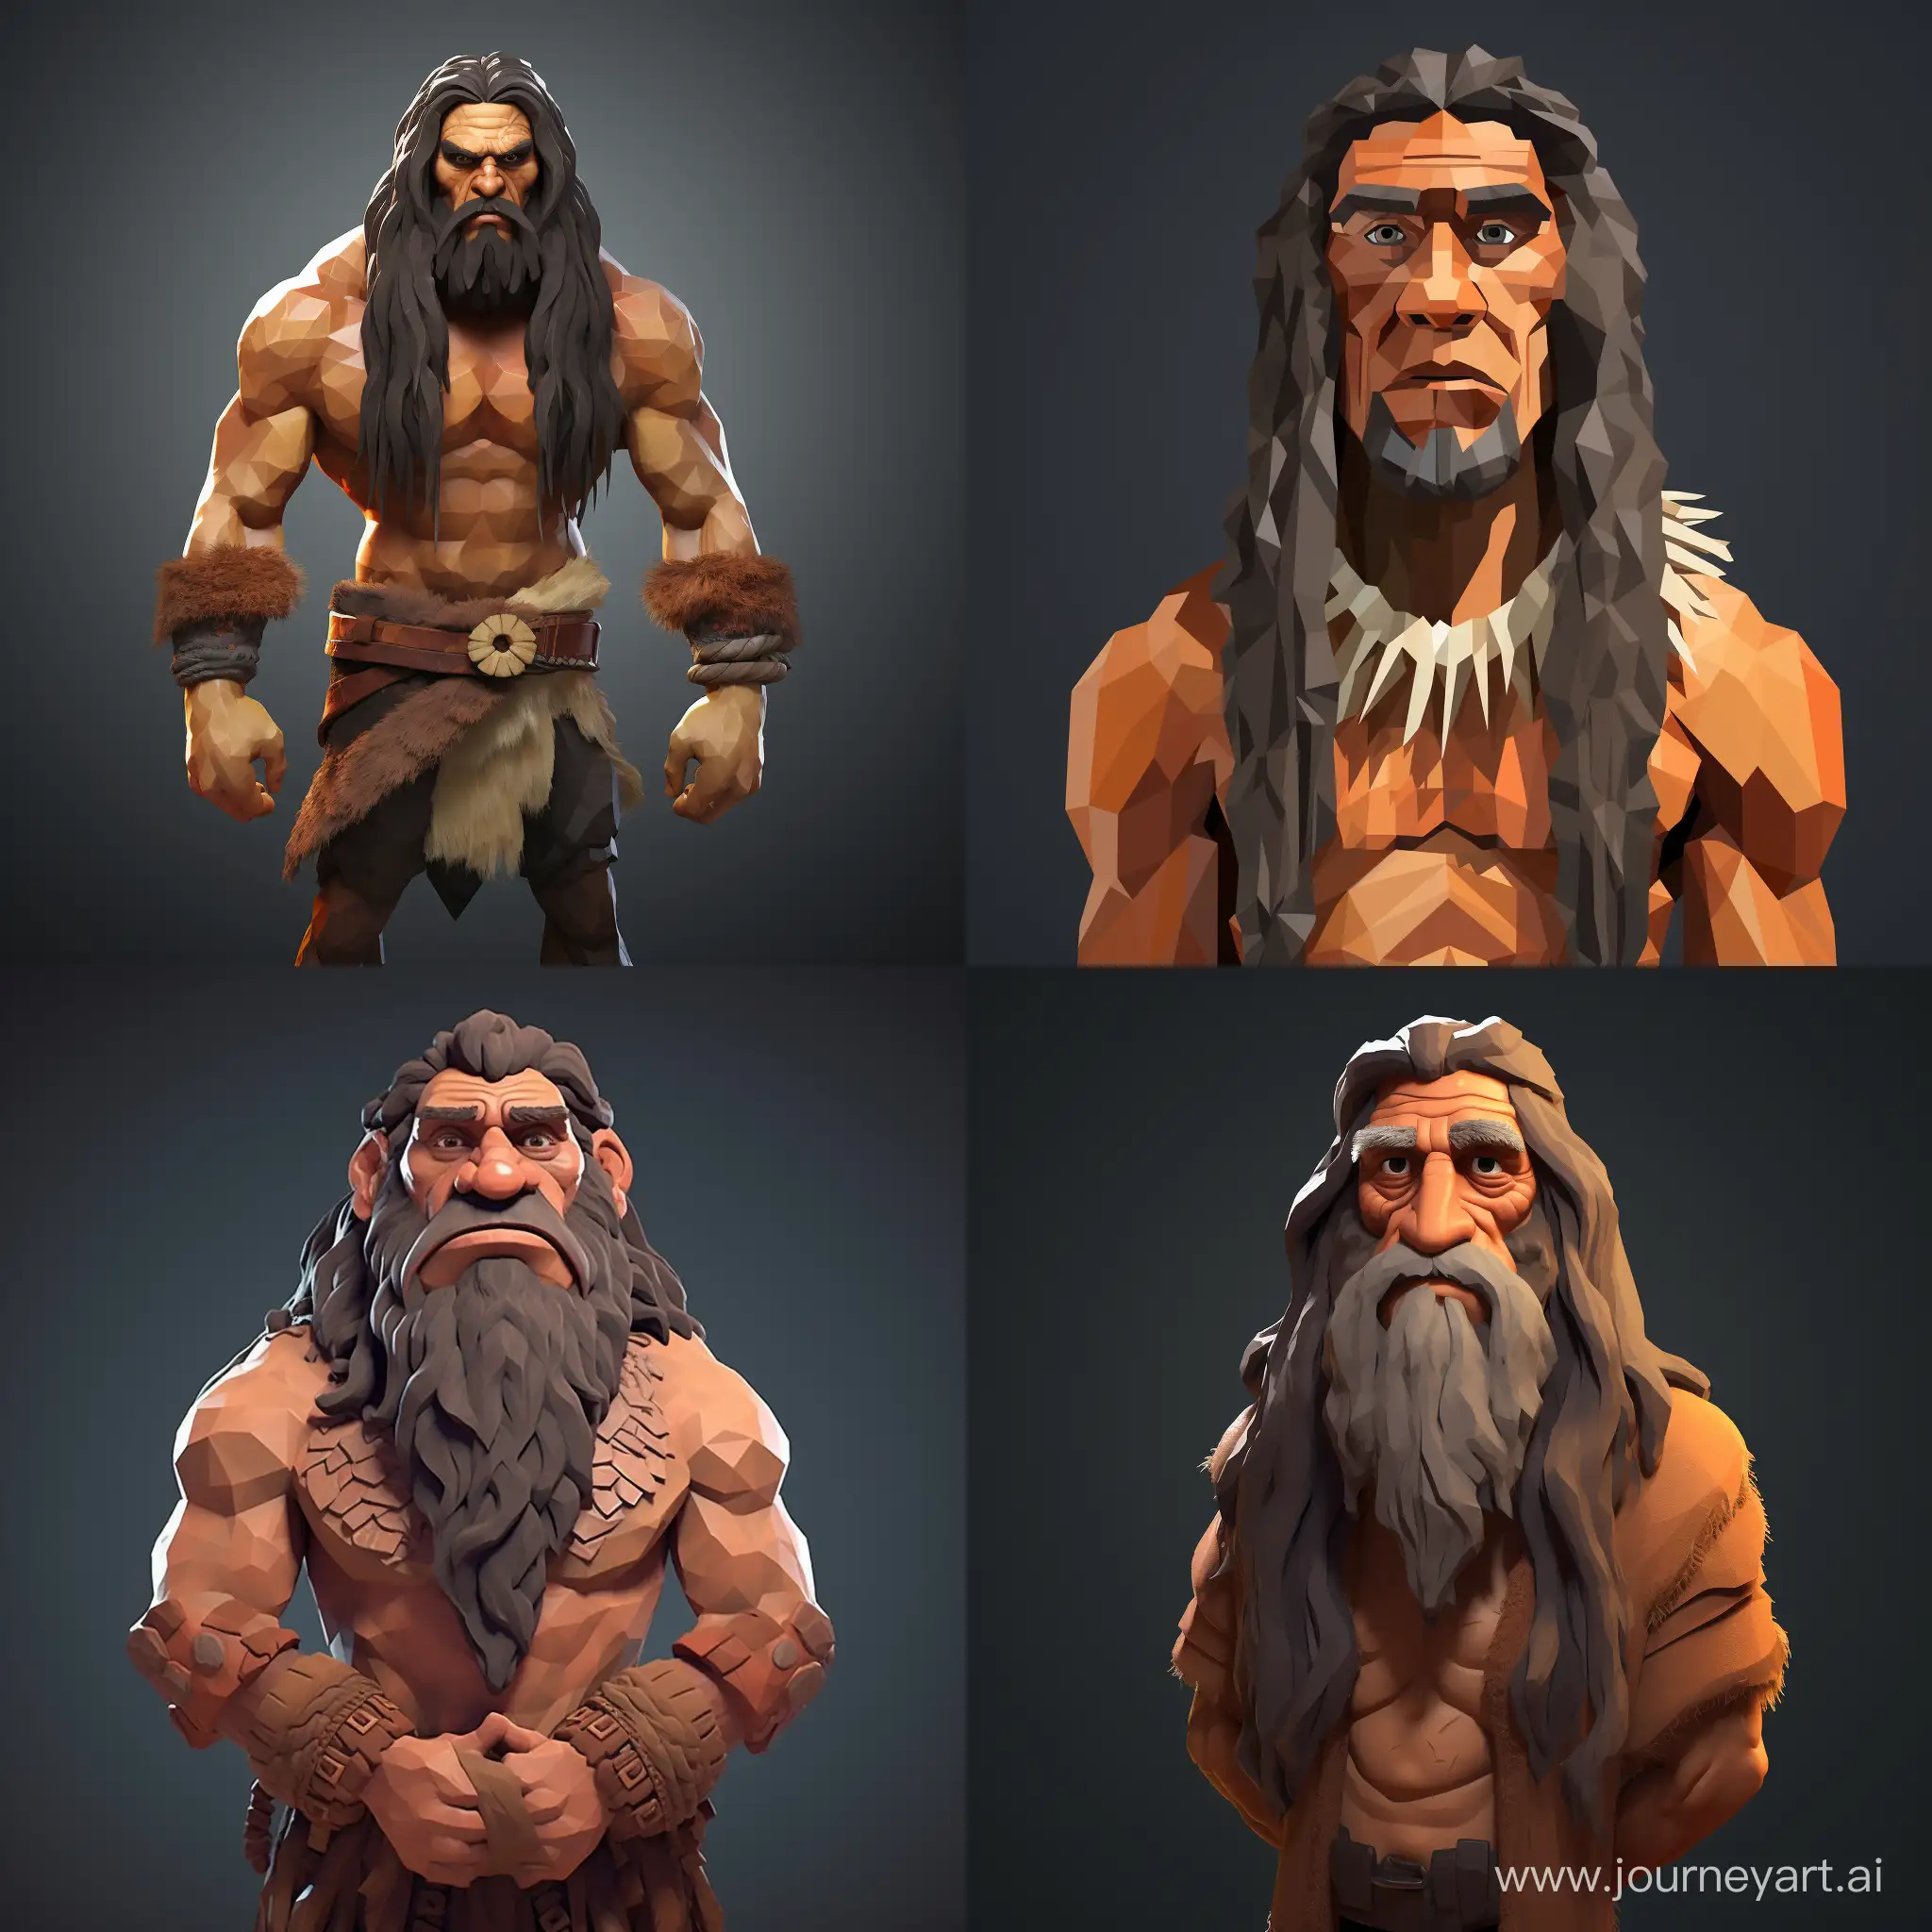 Low-Poly-Neanderthal-Game-Avatar-Model-with-Aspect-Ratio-11